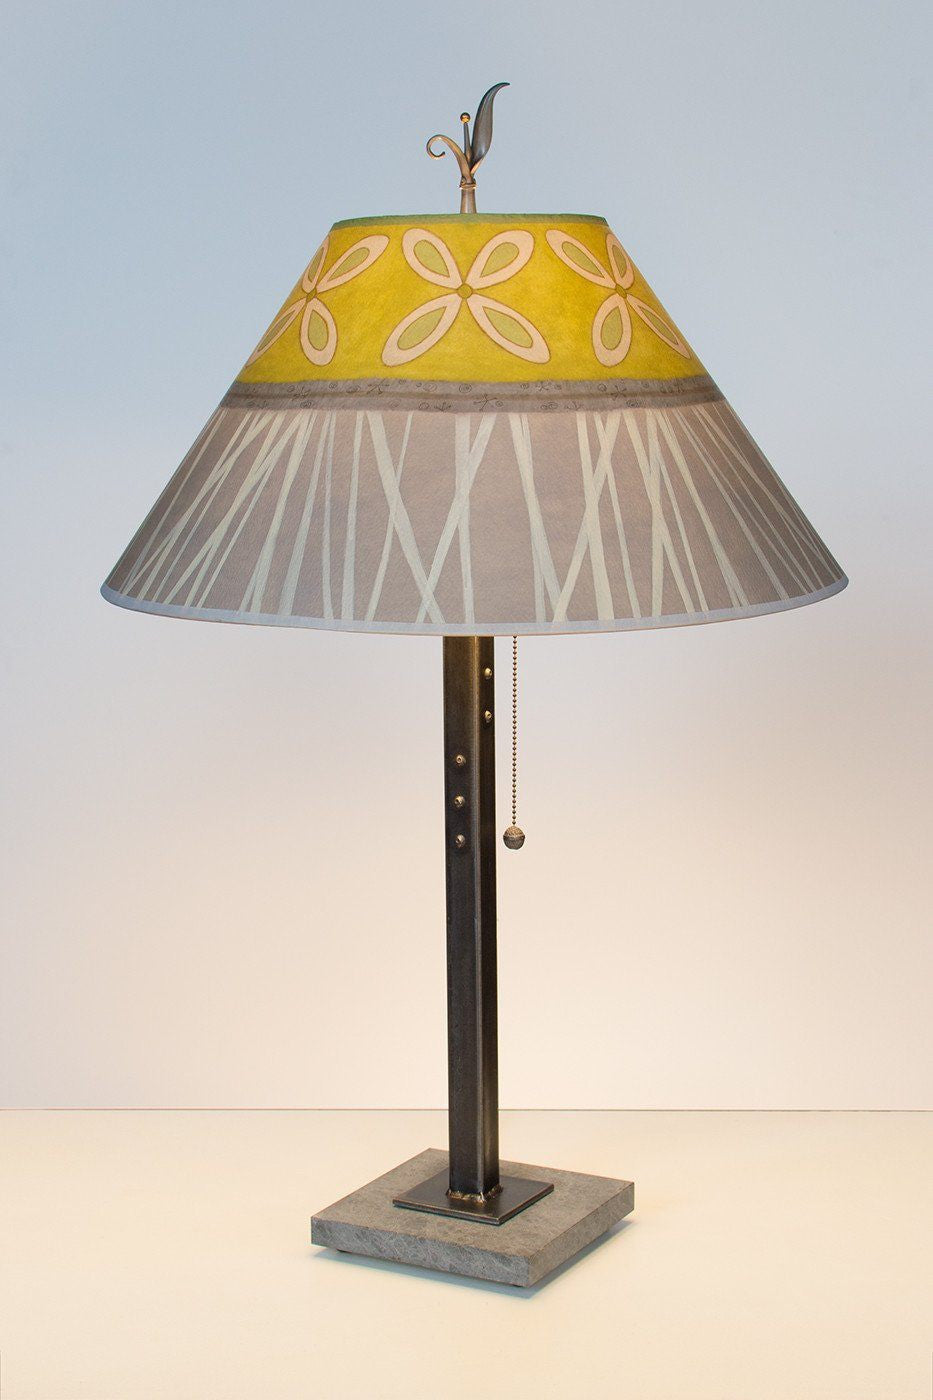 Janna Ugone & Co Table Lamps Steel Table Lamp with Large Conical Shade in Kiwi